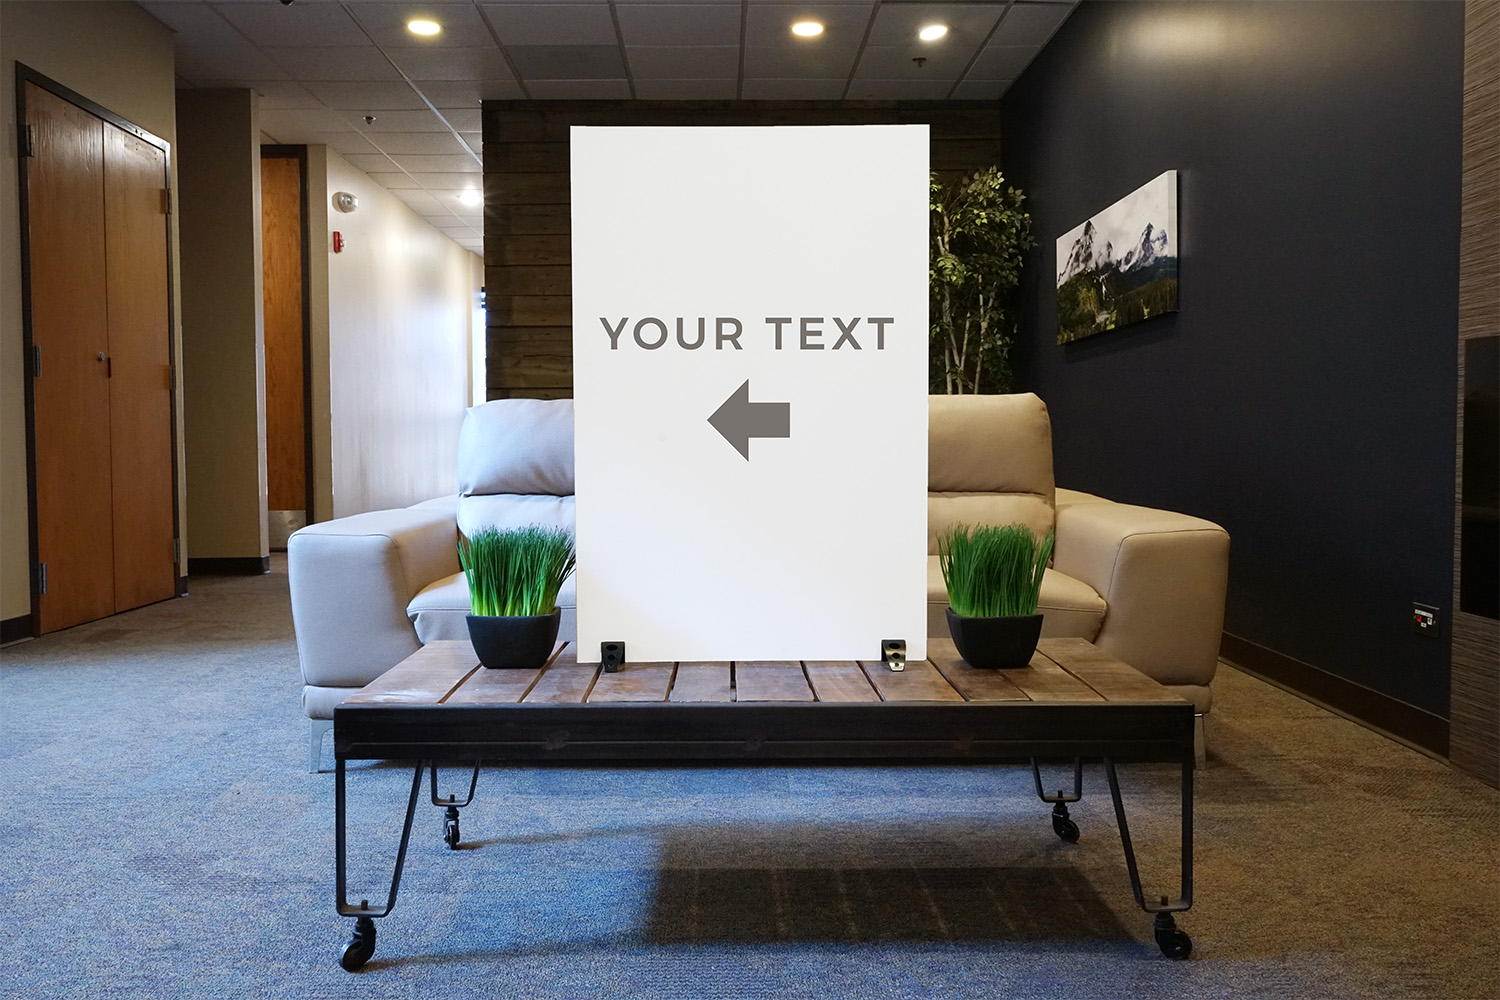 Rigid Signs, Colorful Lights Products, Colorful Lights Your Text, 34.5 x 34.5 6